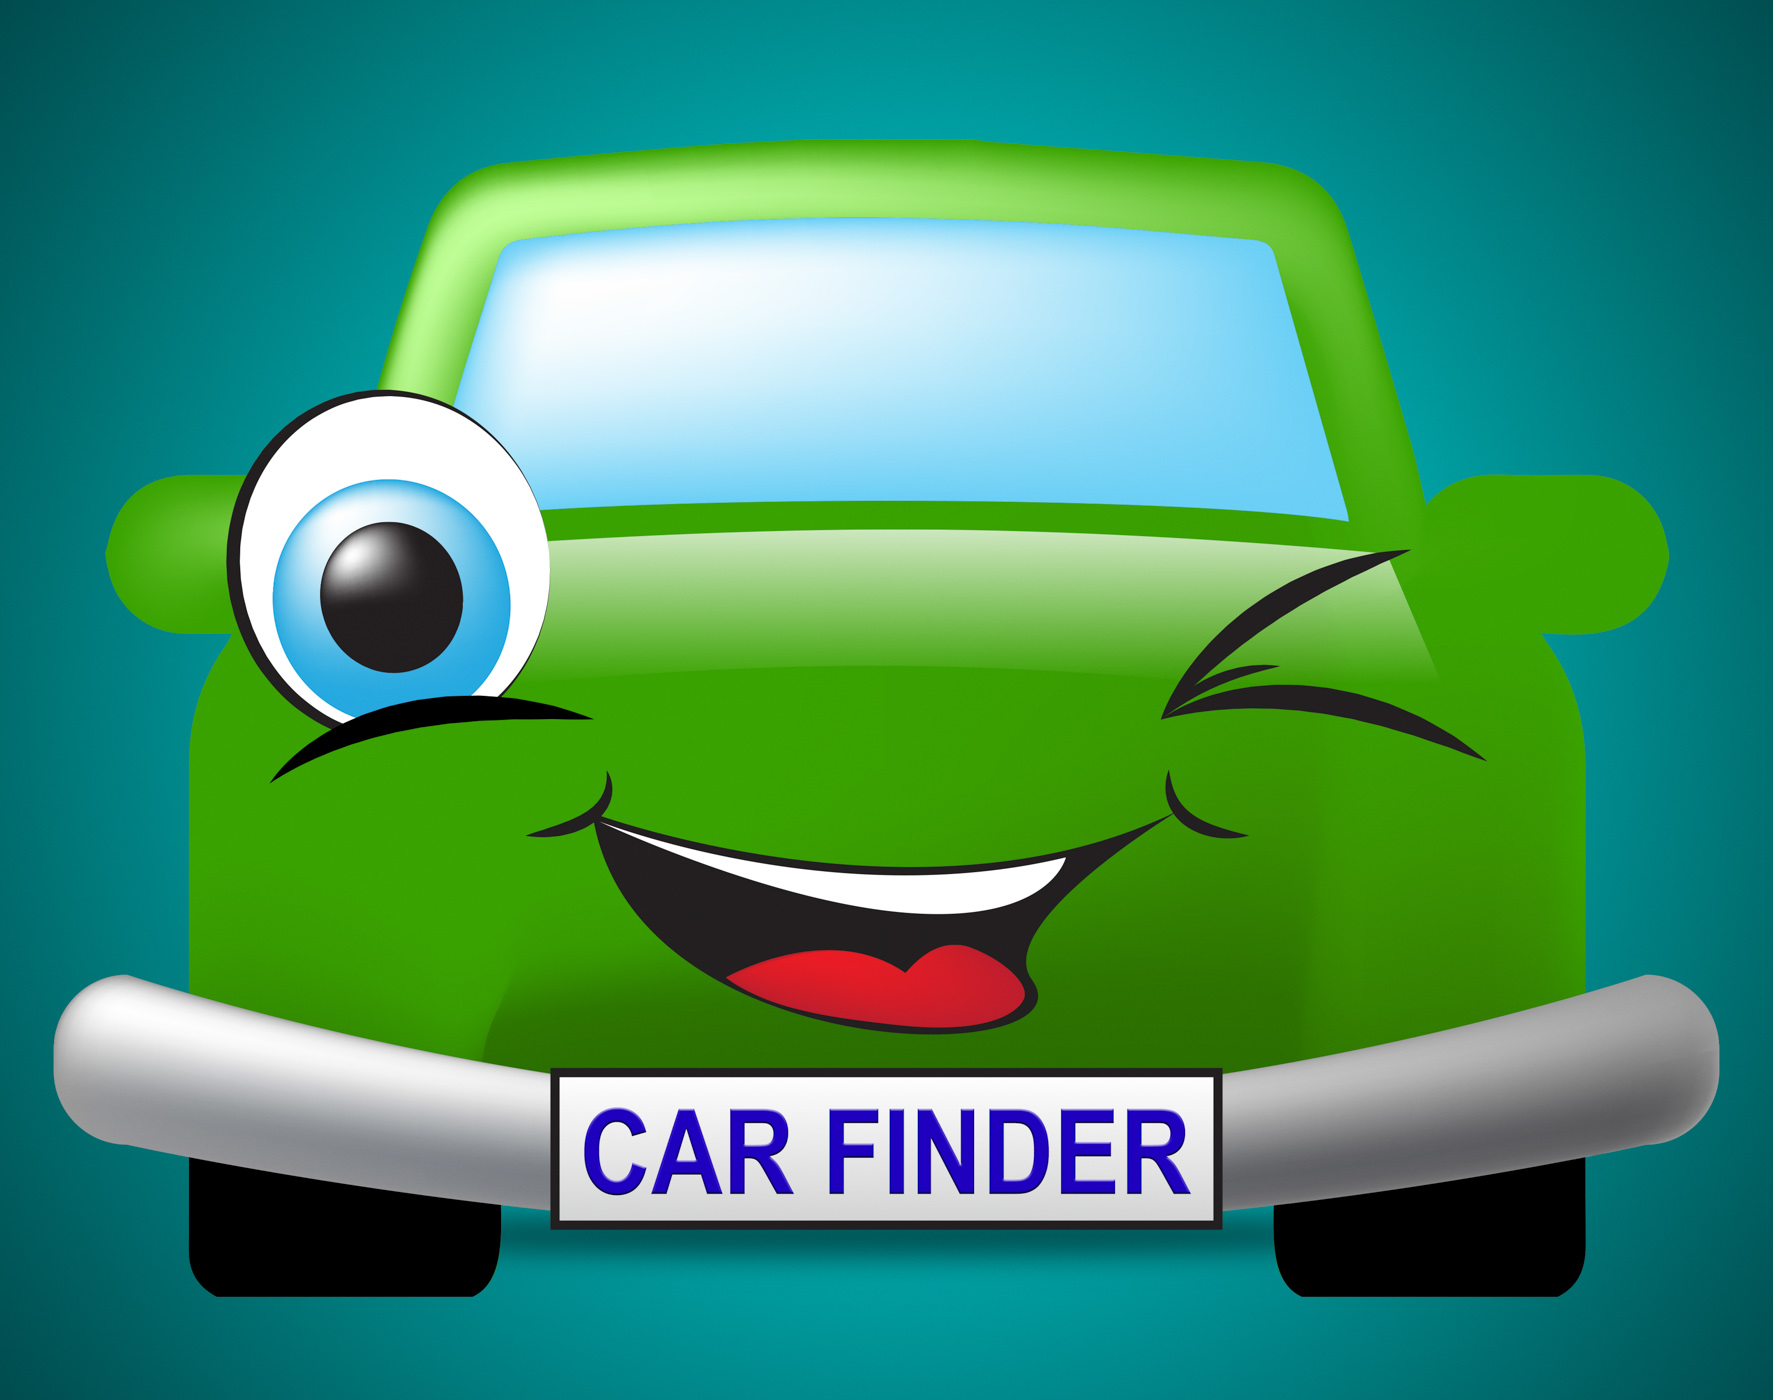 Car finder shows search for and automobile photo